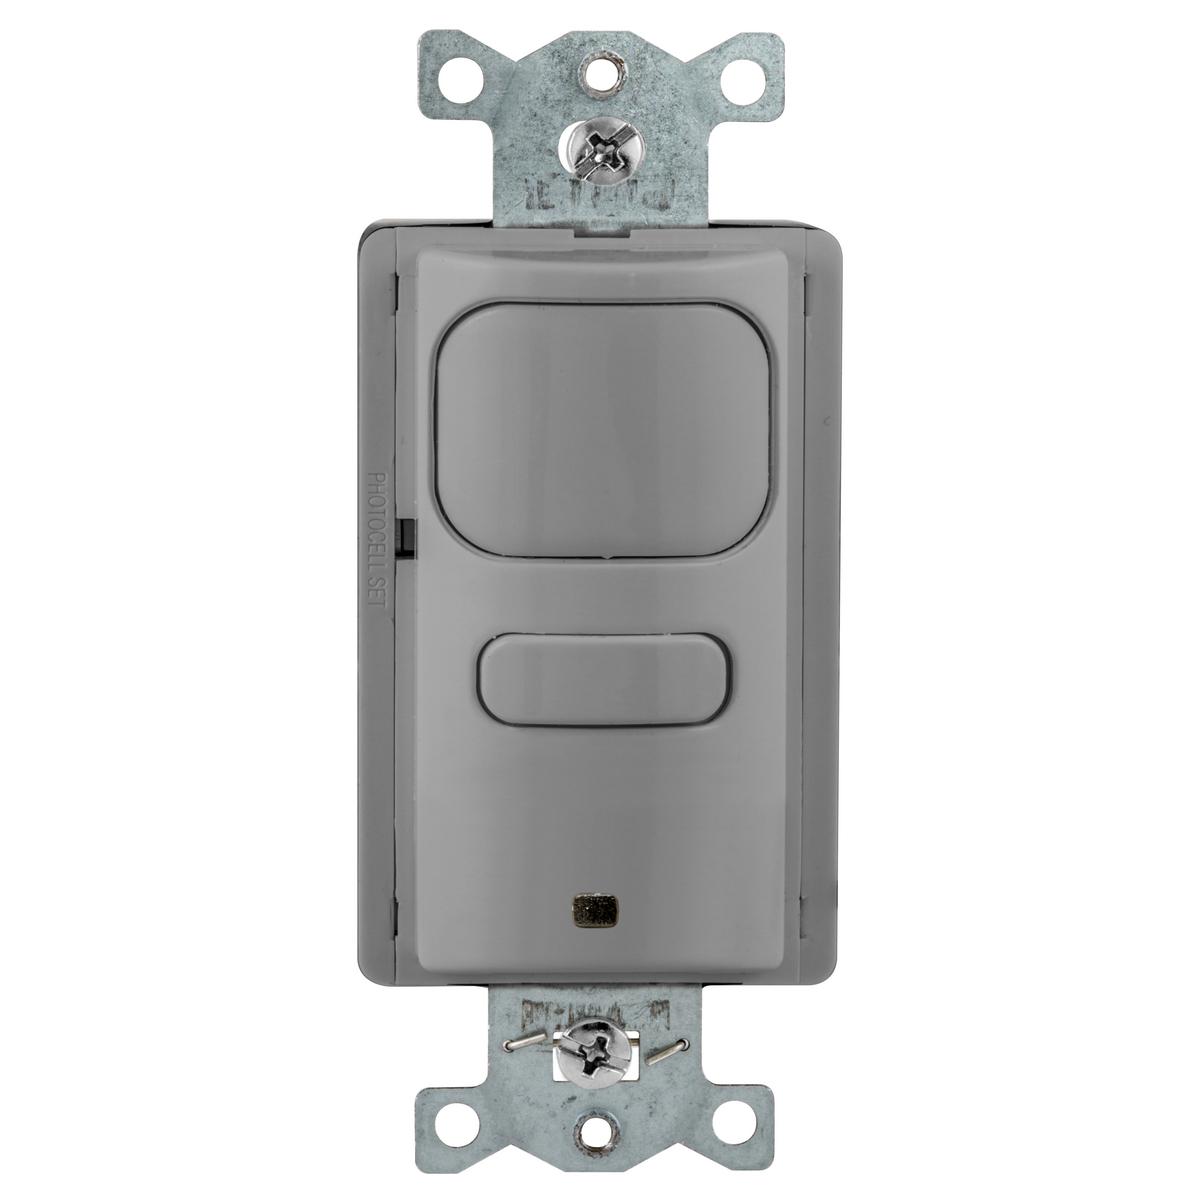 Hubbell AP2000GY1 Occupancy Sensing Products, Wall Switch,Occupancy or Vacancy, Passive Infrared, 1 Relay, 1000 Square Feet, 800WIncandescent, 1000W Fluorescent @ 120V AC, 1800W Fluorescent @277VAC,120/277V AC, With Photocell, Gray 